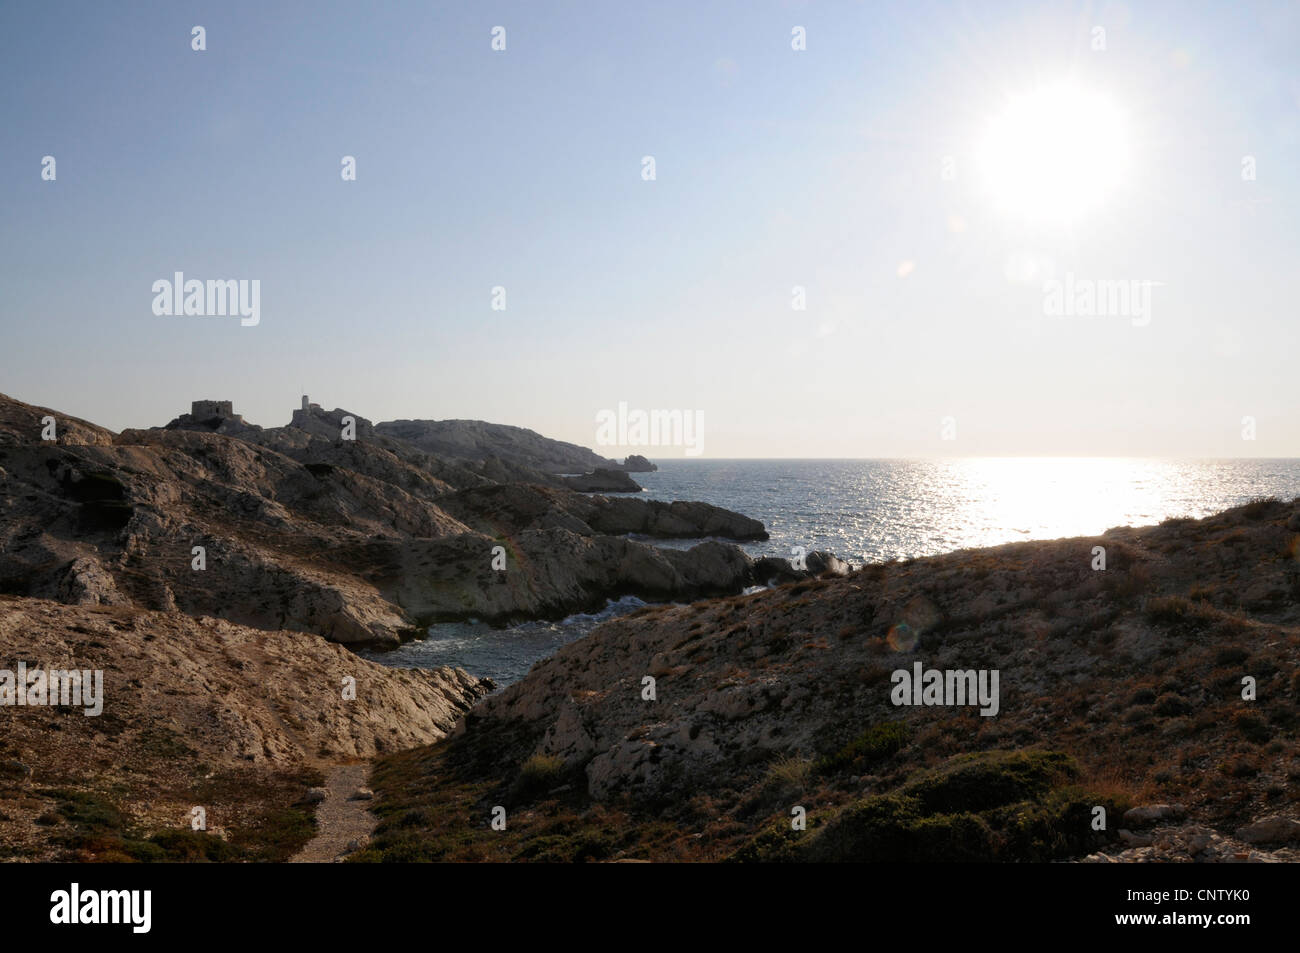 The late afternoon sun setting over the rocky coastline on the Ile de Pomegues near Marseille,France Stock Photo